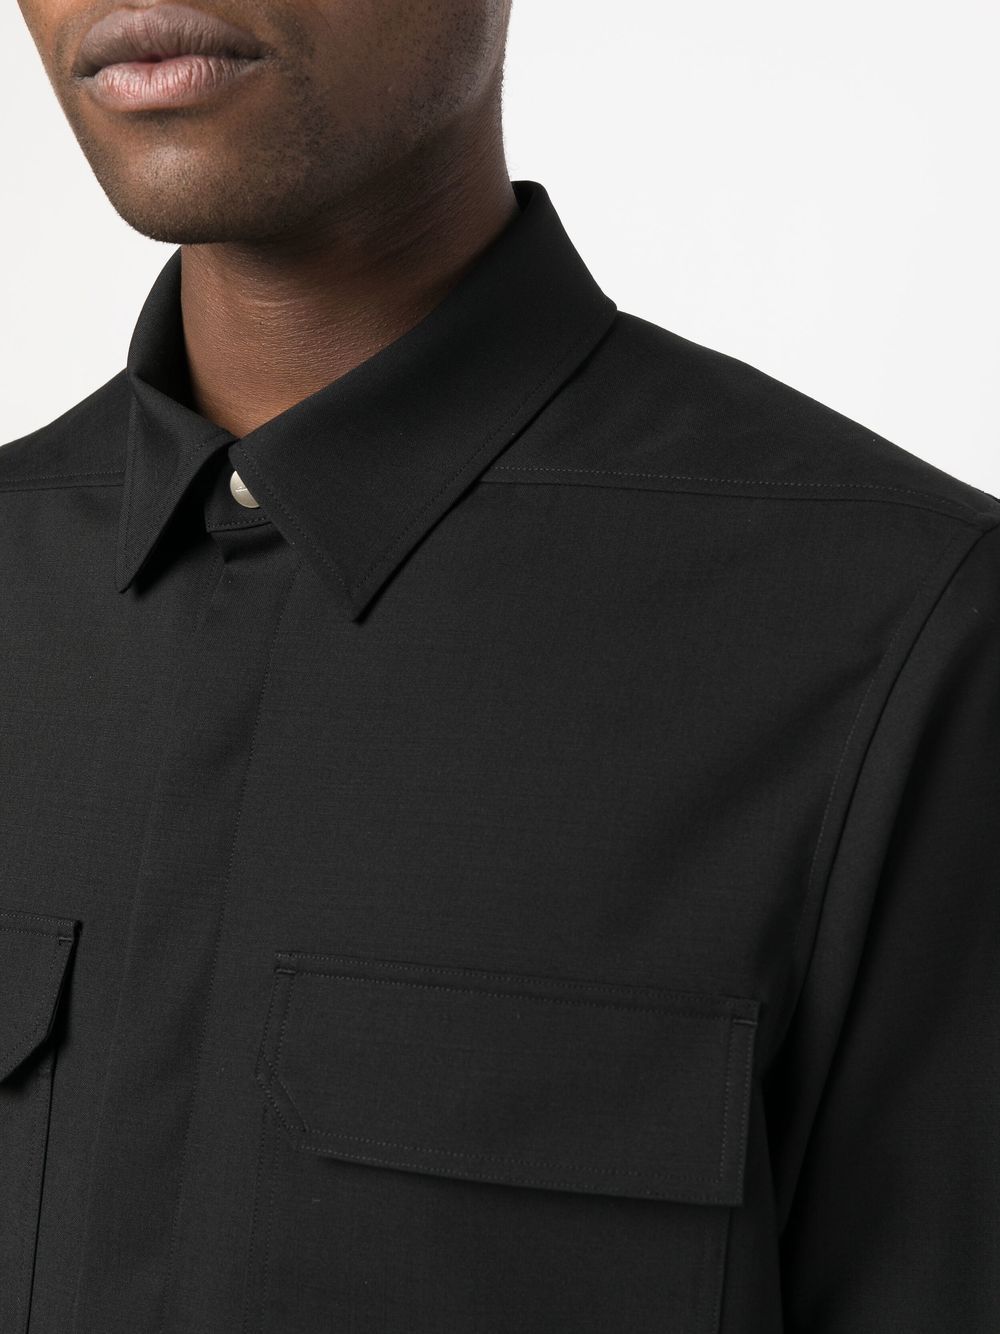 Rick Owens concealed-front Shirt Jacket - Farfetch